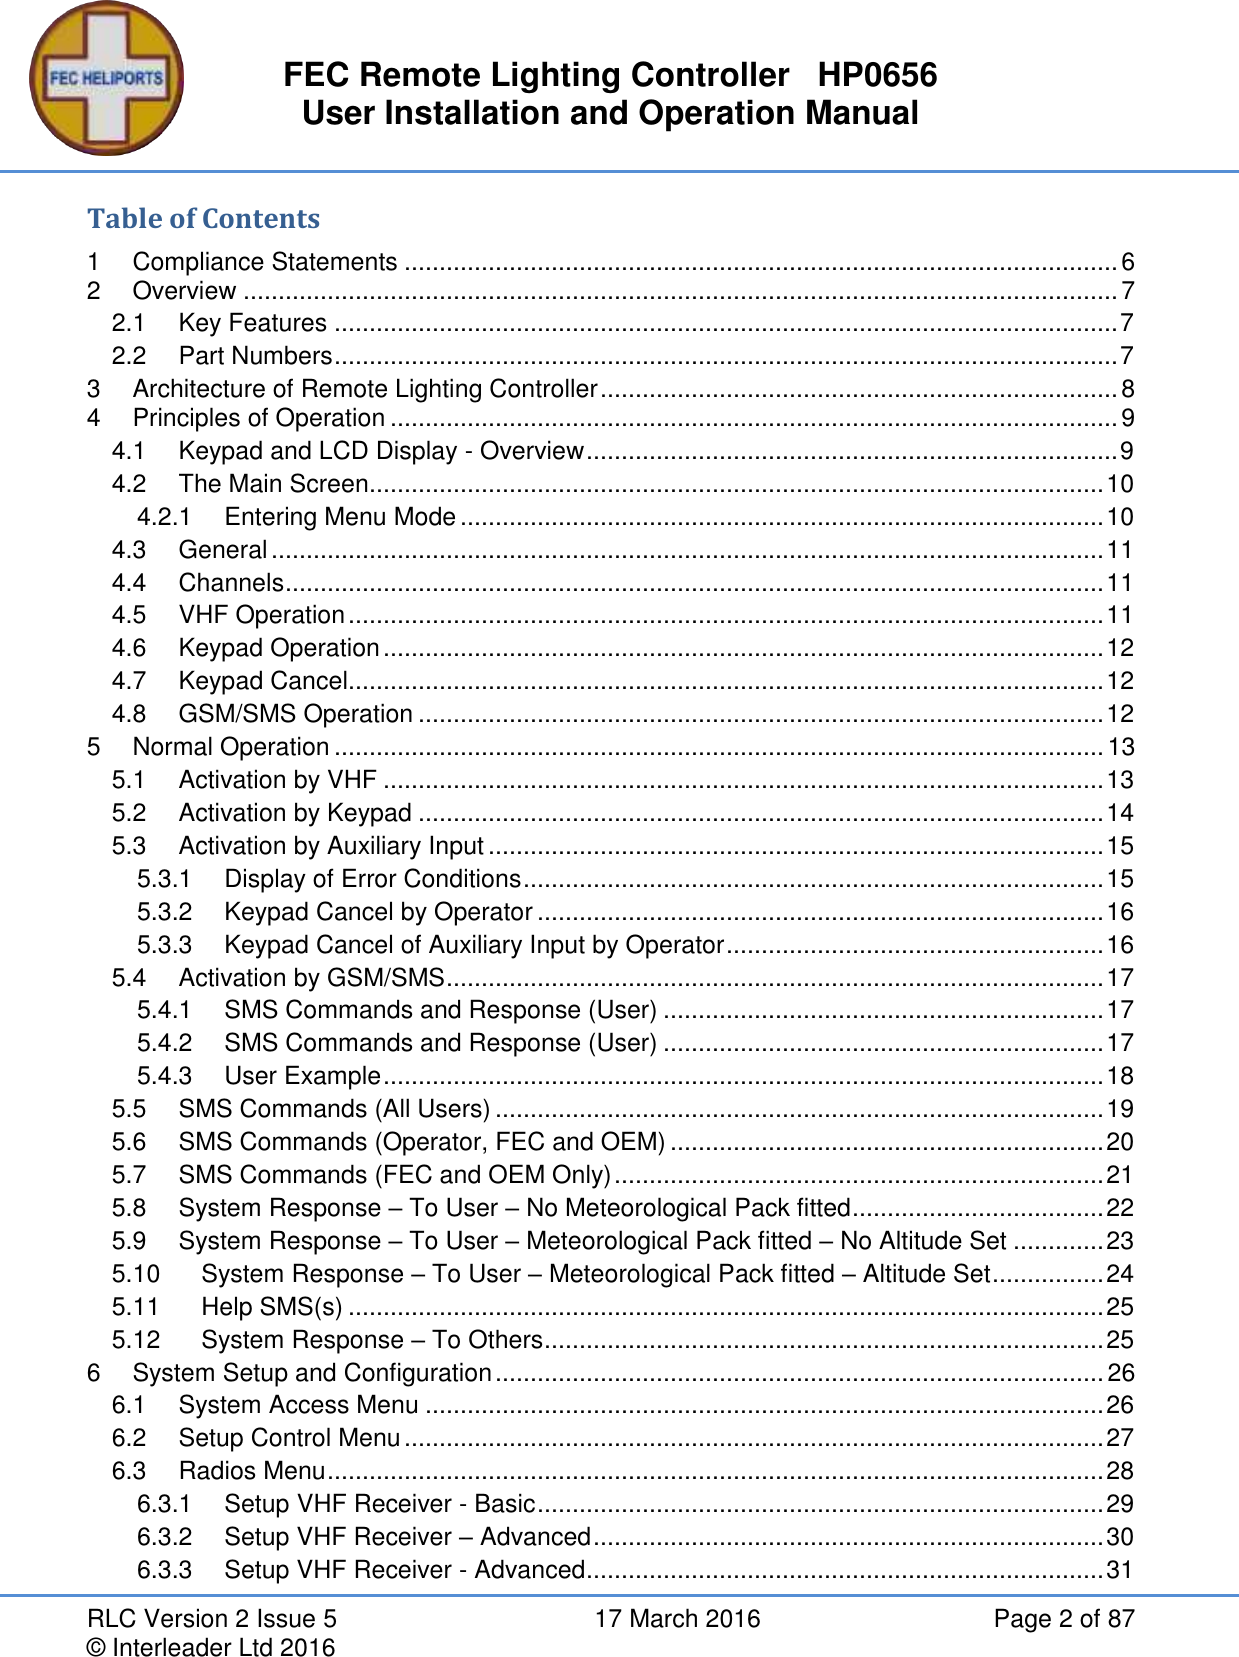 FEC Remote Lighting Controller   HP0656 User Installation and Operation Manual RLC Version 2 Issue 5  17 March 2016  Page 2 of 87 © Interleader Ltd 2016 Table of Contents 1 Compliance Statements ...................................................................................................... 6 2 Overview ............................................................................................................................. 7 2.1 Key Features ................................................................................................................ 7 2.2 Part Numbers ................................................................................................................ 7 3 Architecture of Remote Lighting Controller .......................................................................... 8 4 Principles of Operation ........................................................................................................ 9 4.1 Keypad and LCD Display - Overview ............................................................................ 9 4.2 The Main Screen......................................................................................................... 10 4.2.1 Entering Menu Mode ............................................................................................ 10 4.3 General ....................................................................................................................... 11 4.4 Channels ..................................................................................................................... 11 4.5 VHF Operation ............................................................................................................ 11 4.6 Keypad Operation ....................................................................................................... 12 4.7 Keypad Cancel............................................................................................................ 12 4.8 GSM/SMS Operation .................................................................................................. 12 5 Normal Operation .............................................................................................................. 13 5.1 Activation by VHF ....................................................................................................... 13 5.2 Activation by Keypad .................................................................................................. 14 5.3 Activation by Auxiliary Input ........................................................................................ 15 5.3.1 Display of Error Conditions ................................................................................... 15 5.3.2 Keypad Cancel by Operator ................................................................................. 16 5.3.3 Keypad Cancel of Auxiliary Input by Operator ...................................................... 16 5.4 Activation by GSM/SMS .............................................................................................. 17 5.4.1 SMS Commands and Response (User) ............................................................... 17 5.4.2 SMS Commands and Response (User) ............................................................... 17 5.4.3 User Example ....................................................................................................... 18 5.5 SMS Commands (All Users) ....................................................................................... 19 5.6 SMS Commands (Operator, FEC and OEM) .............................................................. 20 5.7 SMS Commands (FEC and OEM Only) ...................................................................... 21 5.8 System Response – To User – No Meteorological Pack fitted .................................... 22 5.9 System Response – To User – Meteorological Pack fitted – No Altitude Set ............. 23 5.10 System Response – To User – Meteorological Pack fitted – Altitude Set ................ 24 5.11 Help SMS(s) ............................................................................................................ 25 5.12 System Response – To Others ................................................................................ 25 6 System Setup and Configuration ....................................................................................... 26 6.1 System Access Menu ................................................................................................. 26 6.2 Setup Control Menu .................................................................................................... 27 6.3 Radios Menu ............................................................................................................... 28 6.3.1 Setup VHF Receiver - Basic ................................................................................. 29 6.3.2 Setup VHF Receiver – Advanced ......................................................................... 30 6.3.3 Setup VHF Receiver - Advanced .......................................................................... 31 